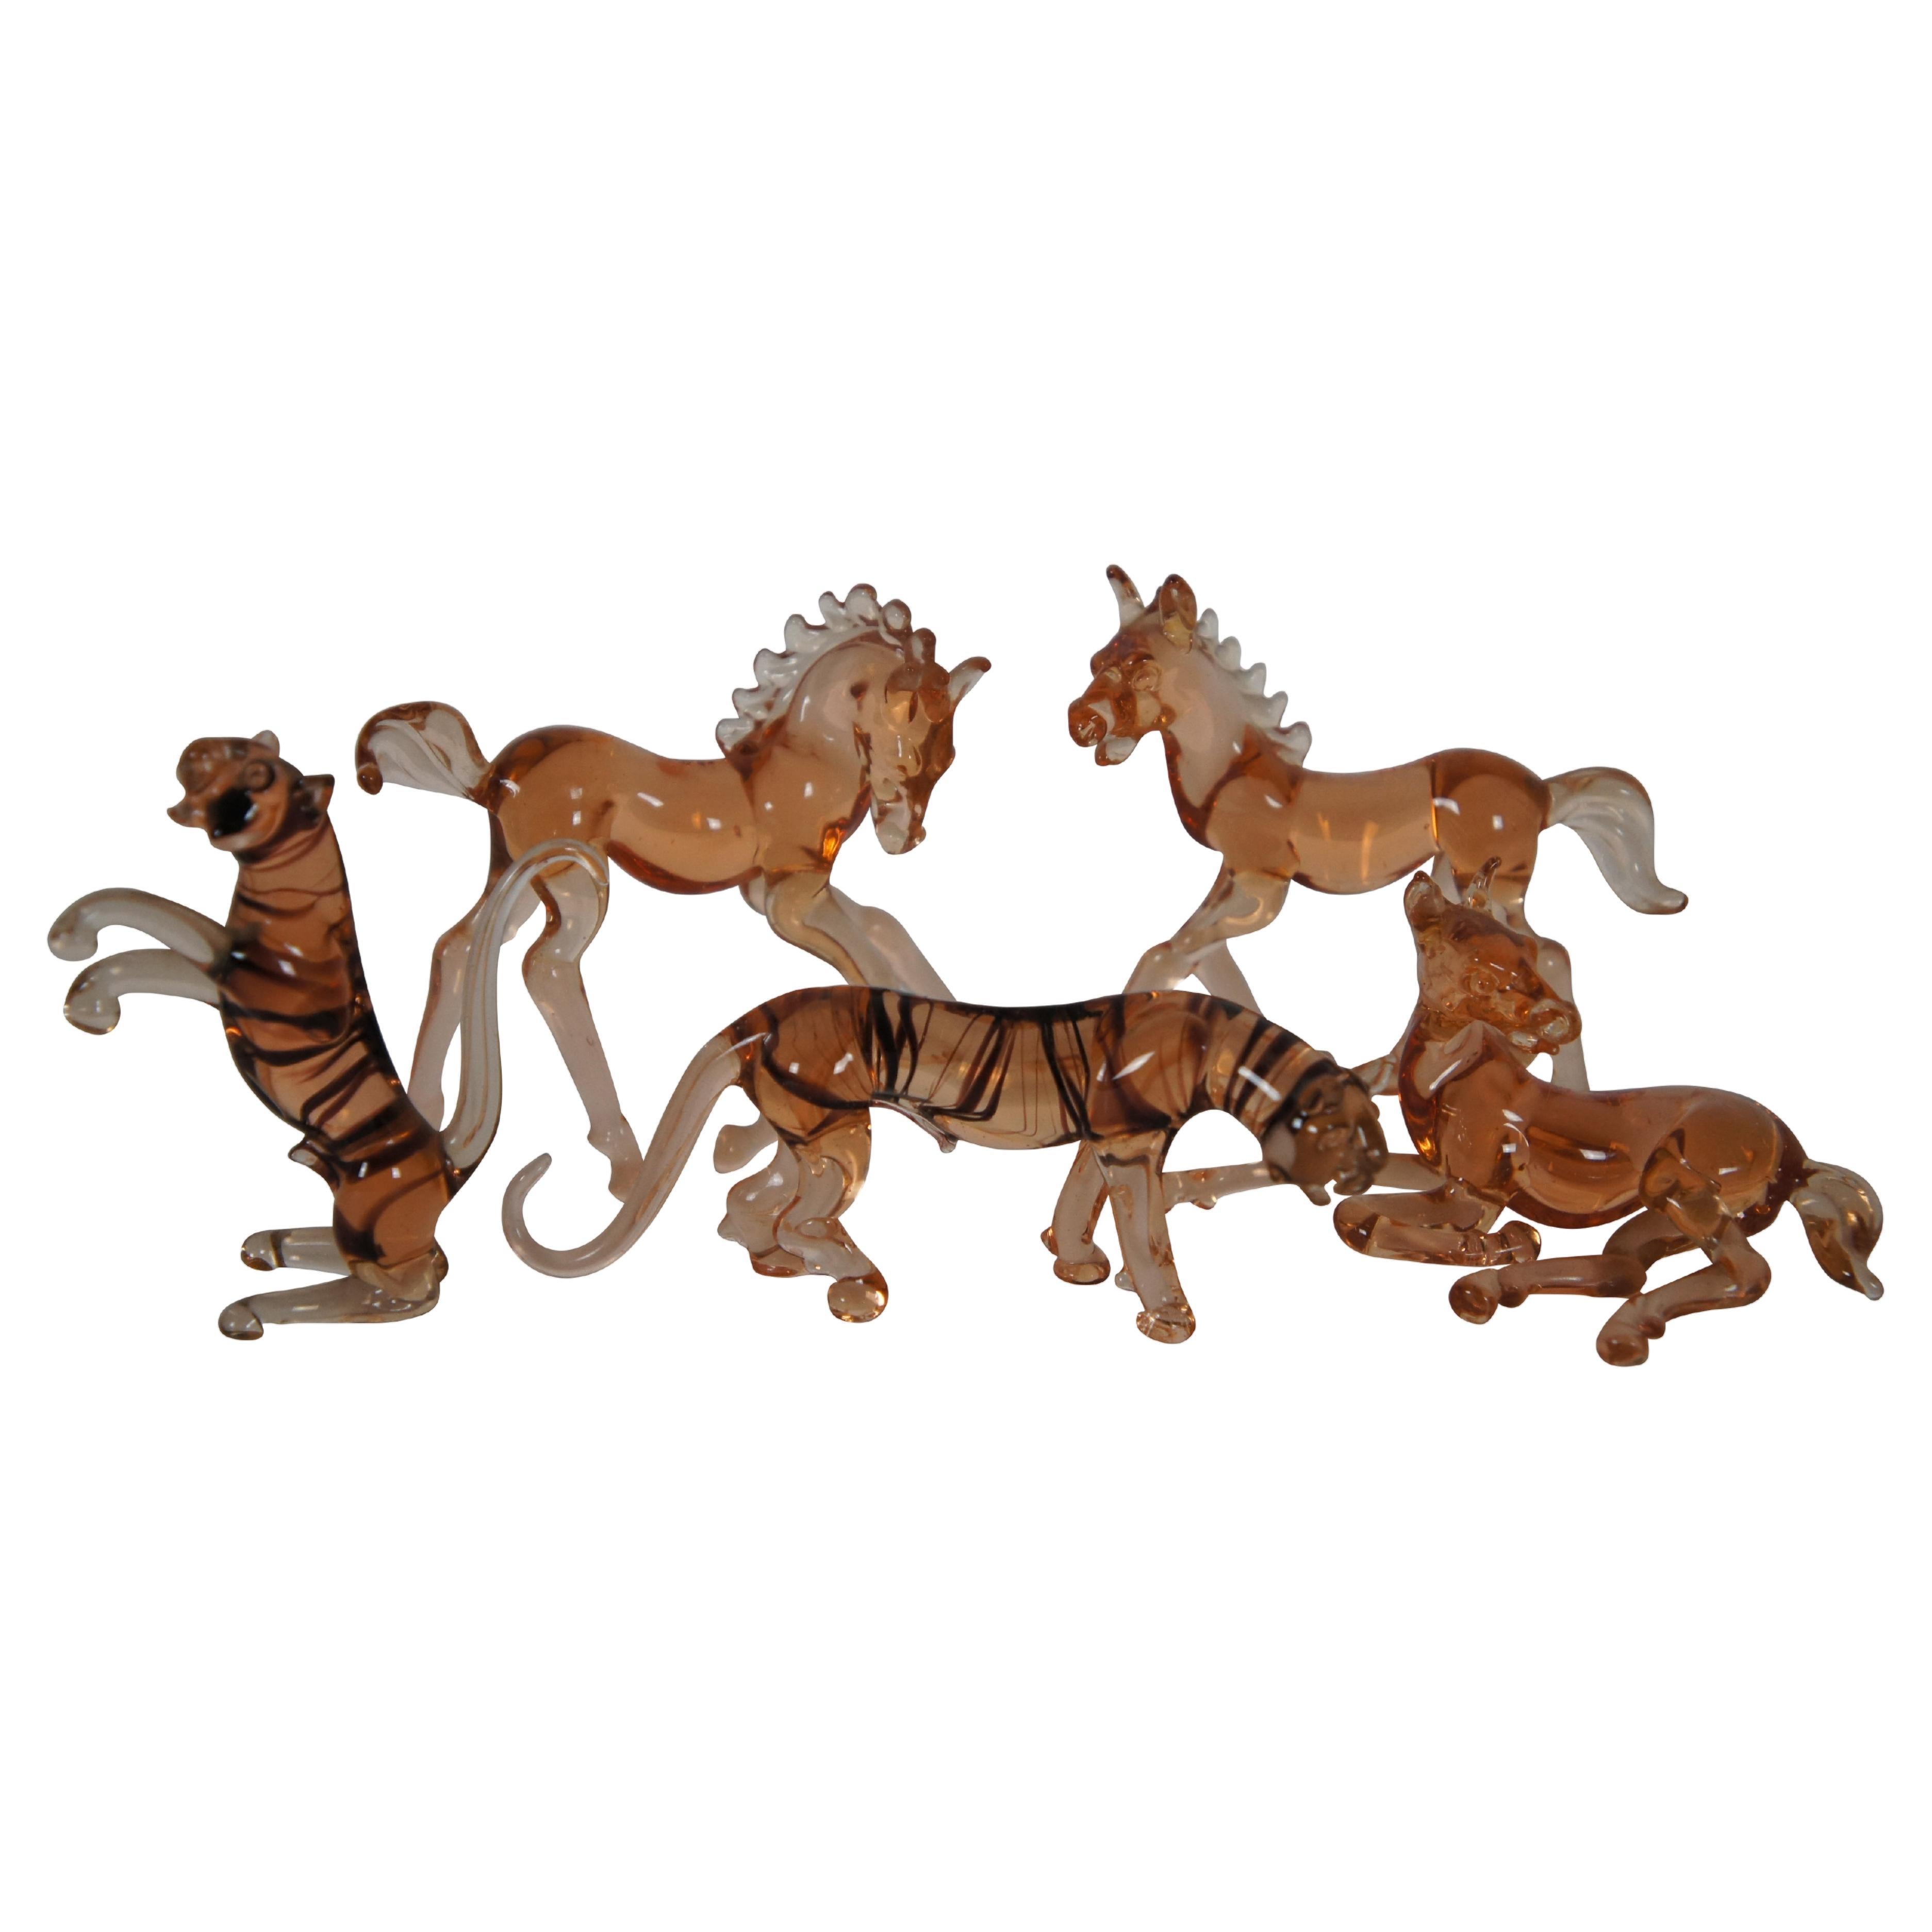 5 Vintage Hand Blown Amber Art Glass Animals Equestrian Horse Bengal Tiger 3" (Cheval Bengalais Tigre)